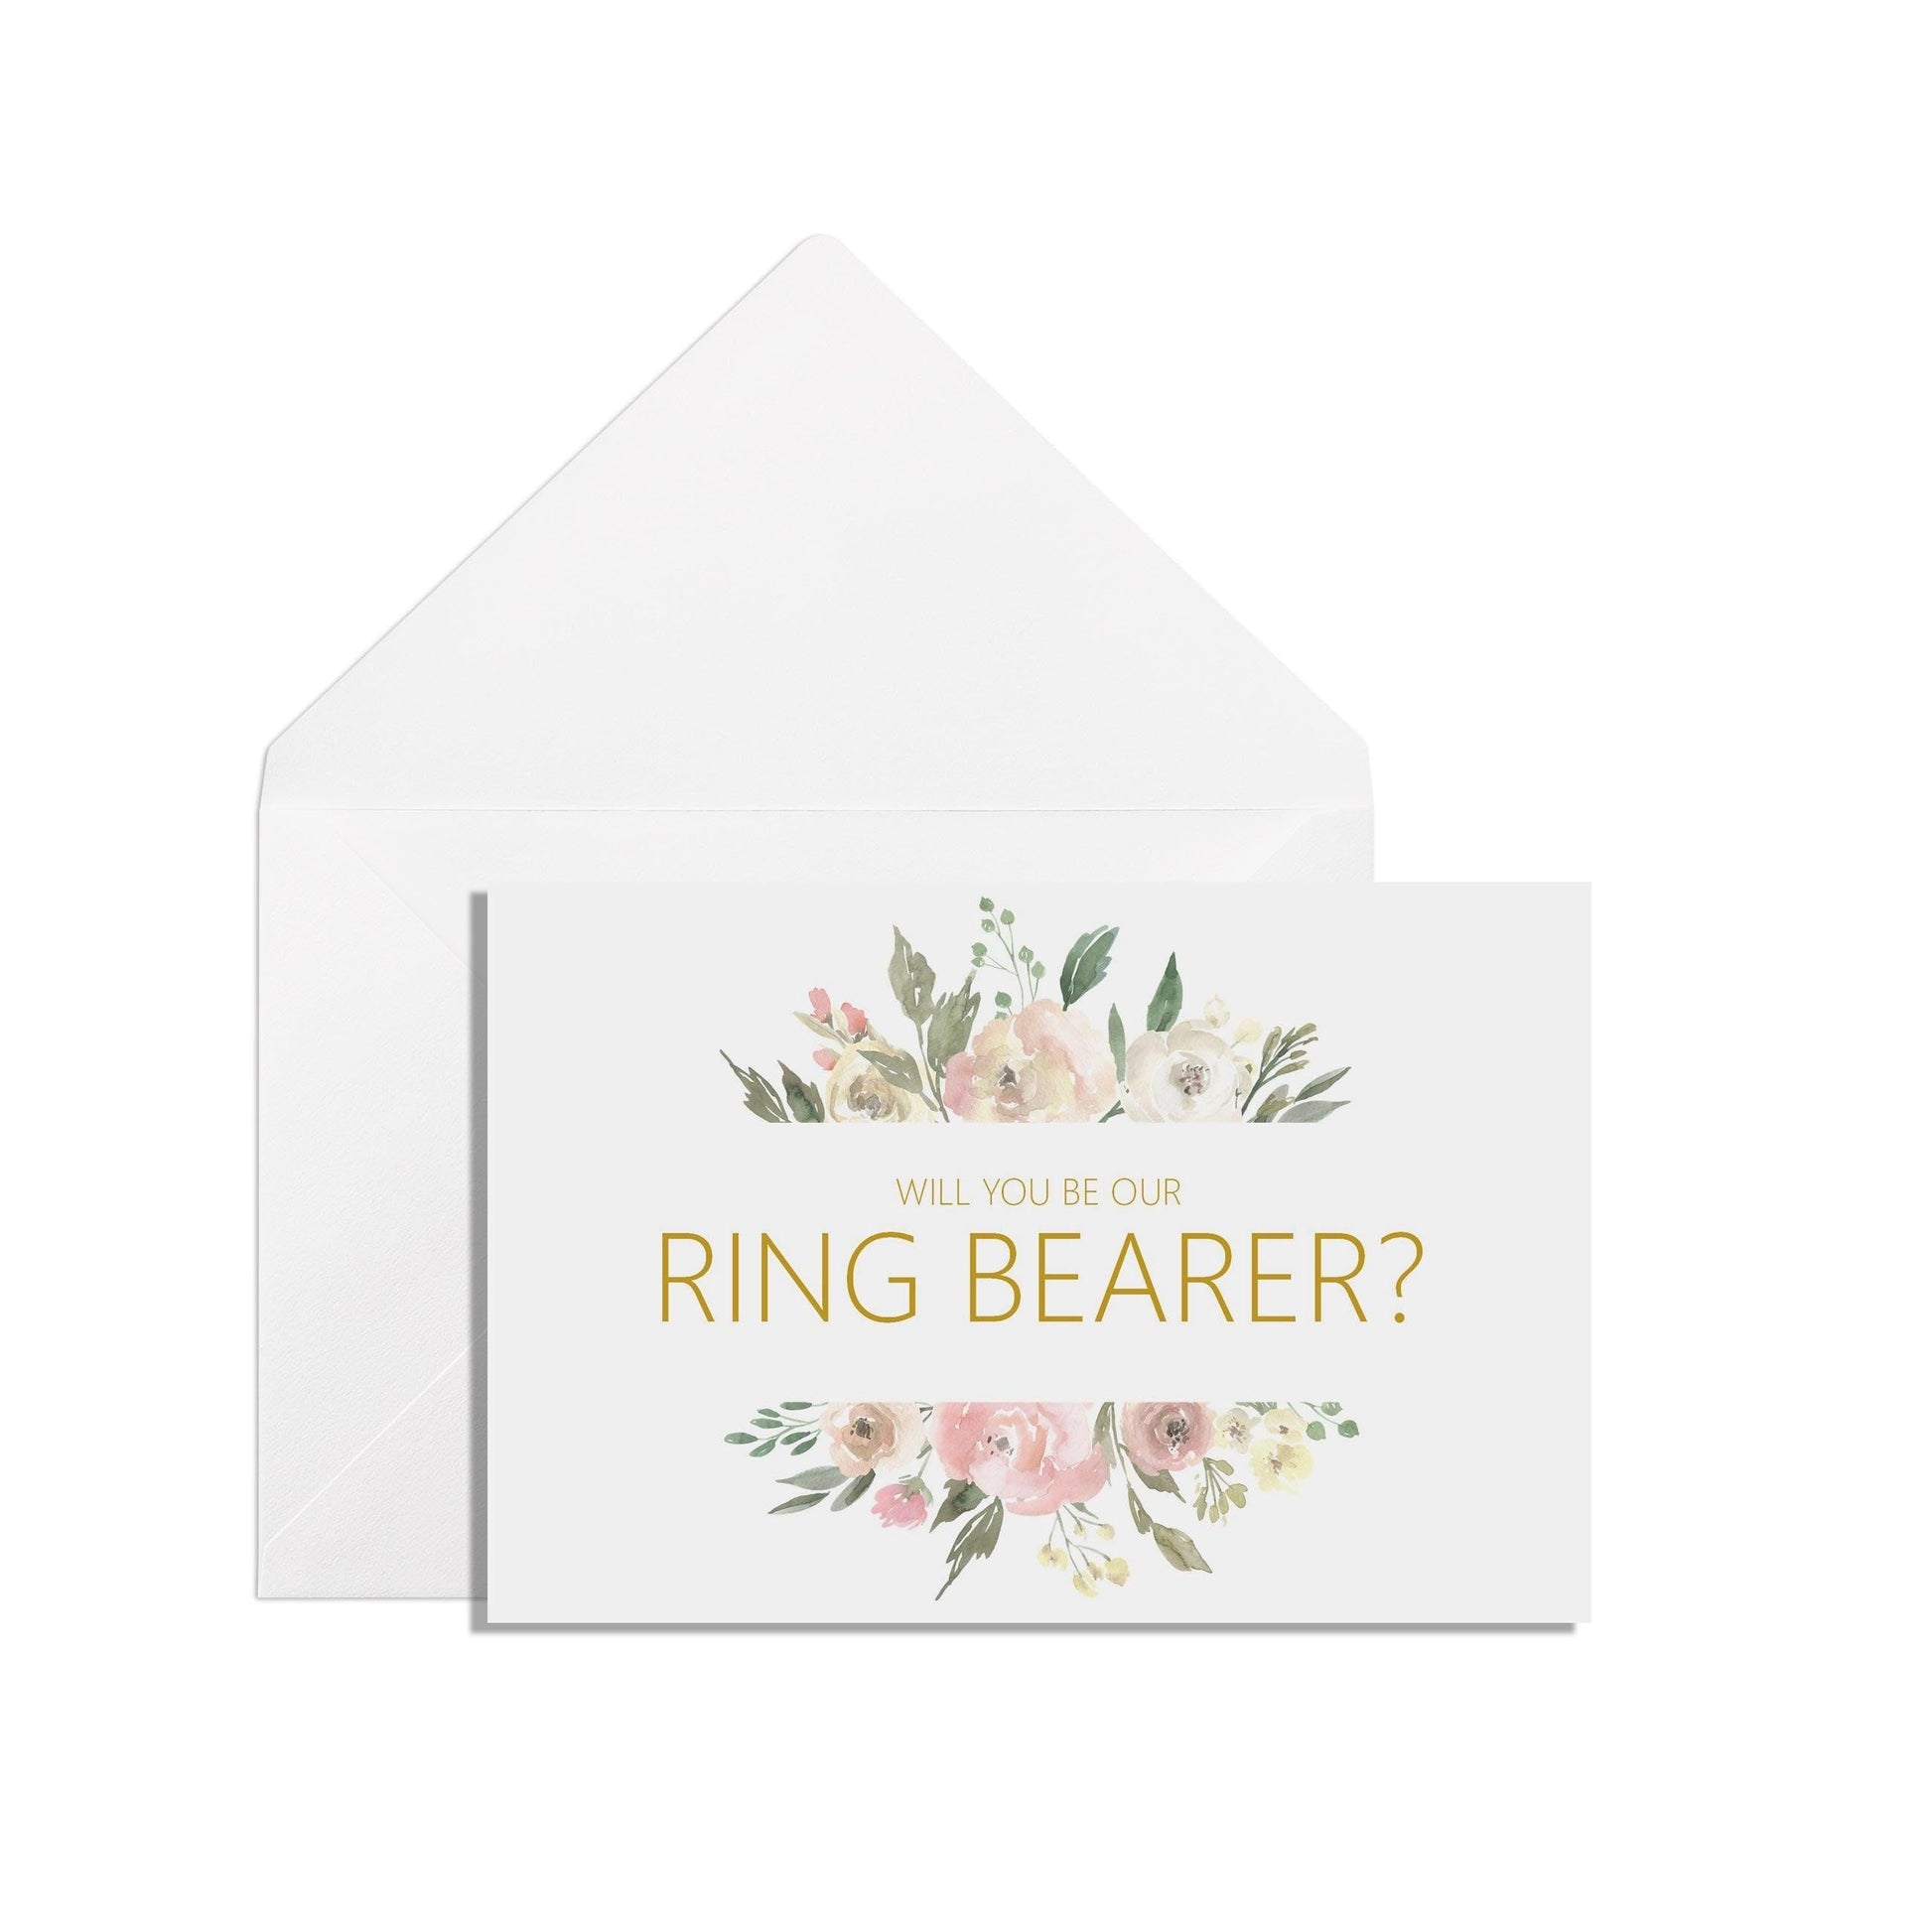  Will You Be Our Ring Bearer? A6 Blush Floral Proposal Card With White Envelope by PMPRINTED 